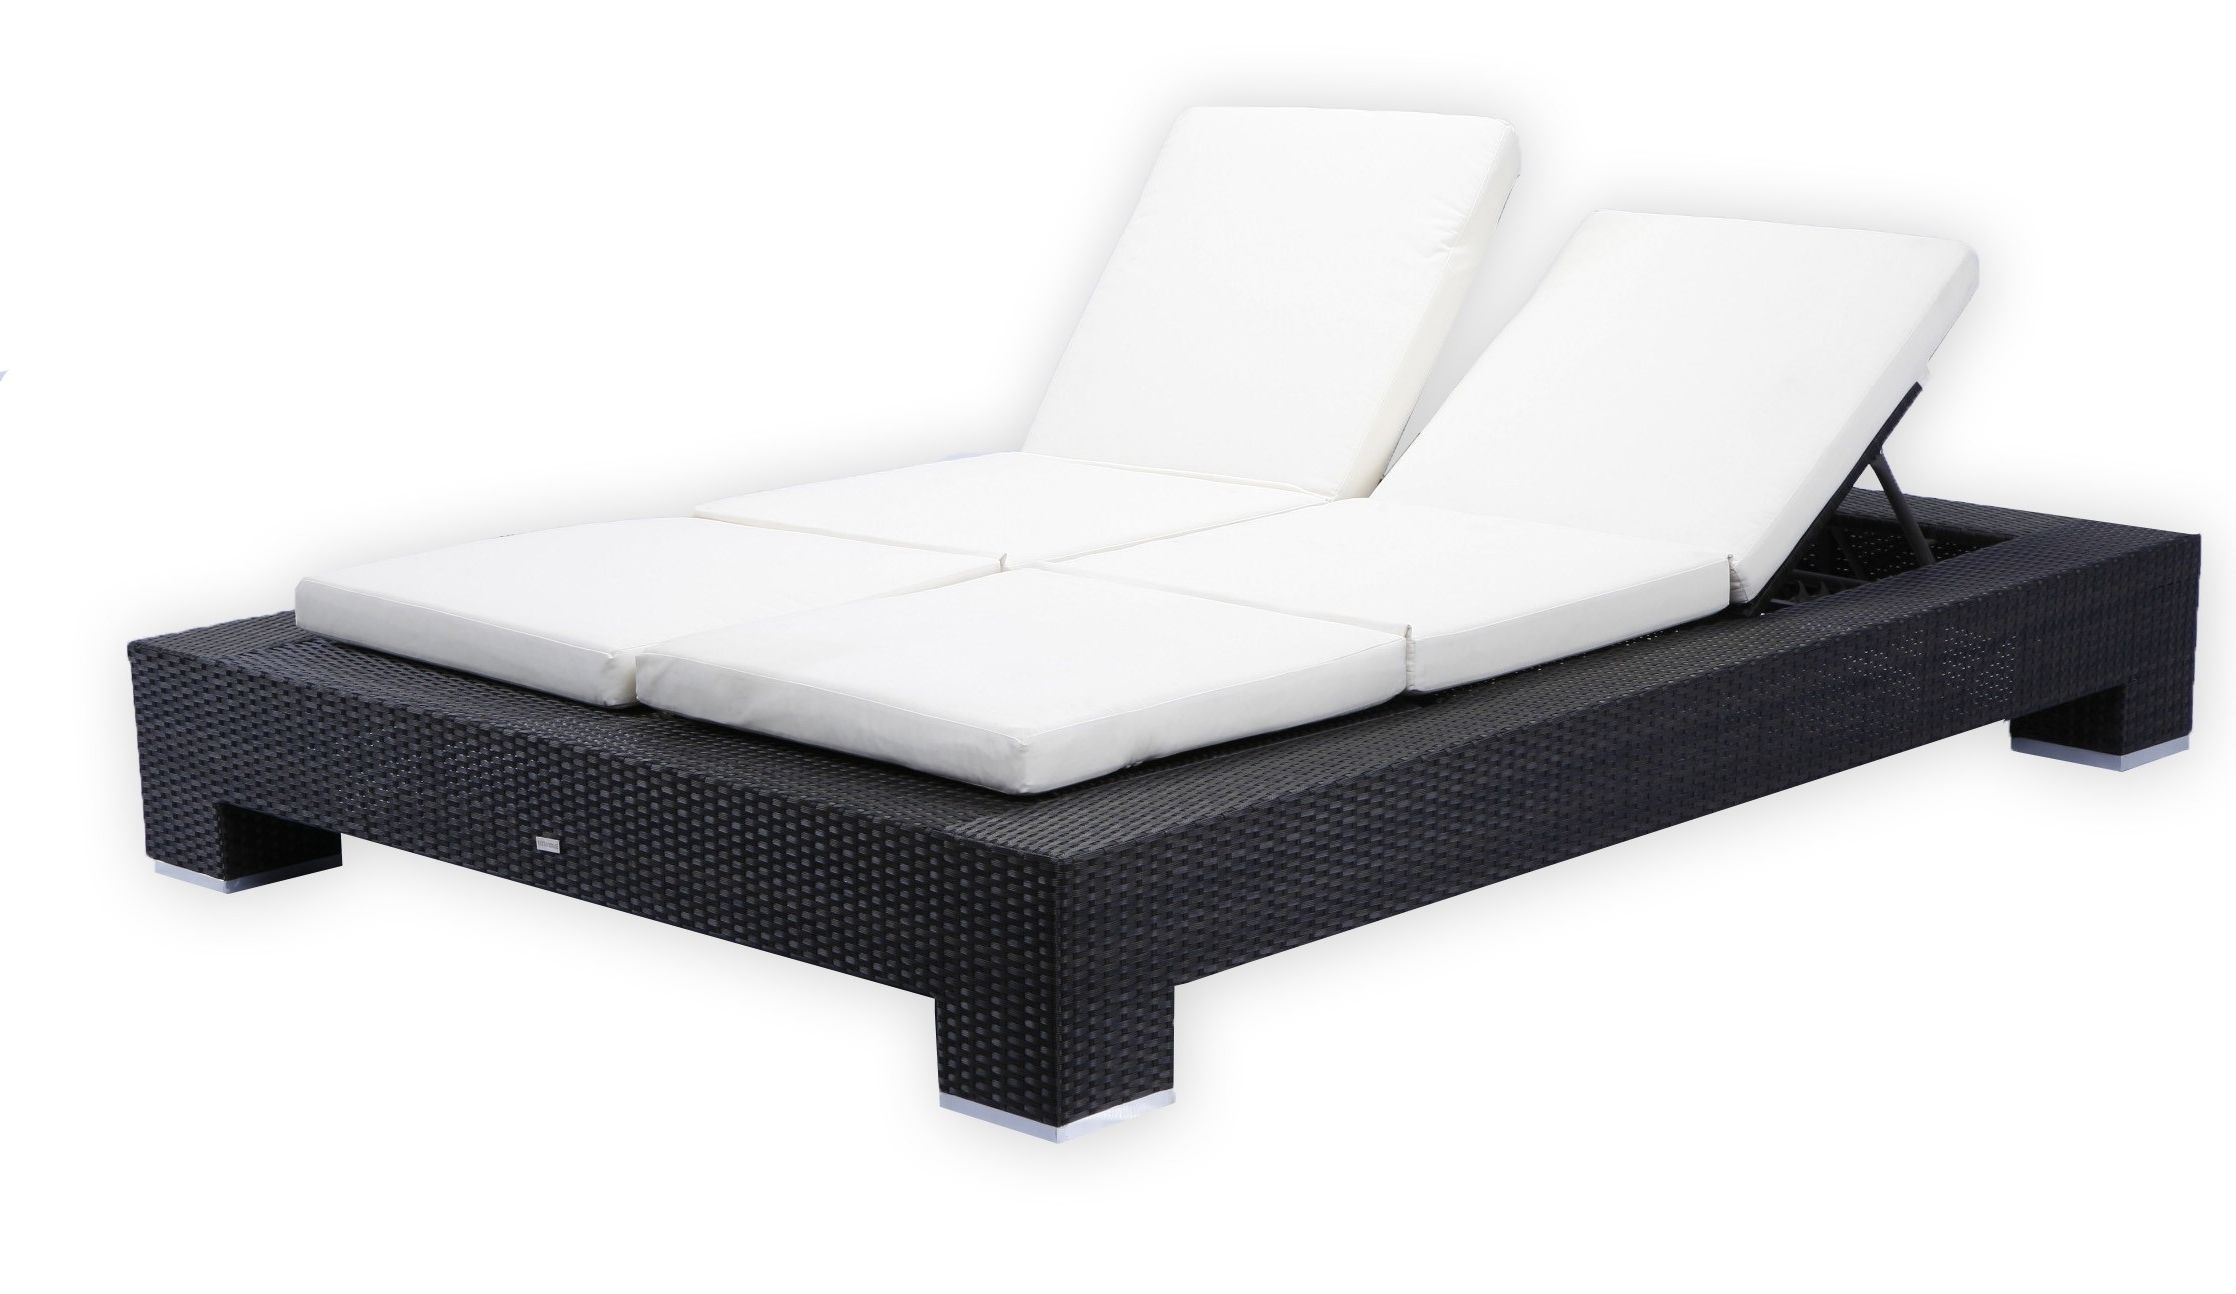 Current Outdoor : Lowes Chaise Lounge White Outdoor Chaise Lounge Outdoor Inside Double Outdoor Chaise Lounges (View 12 of 15)